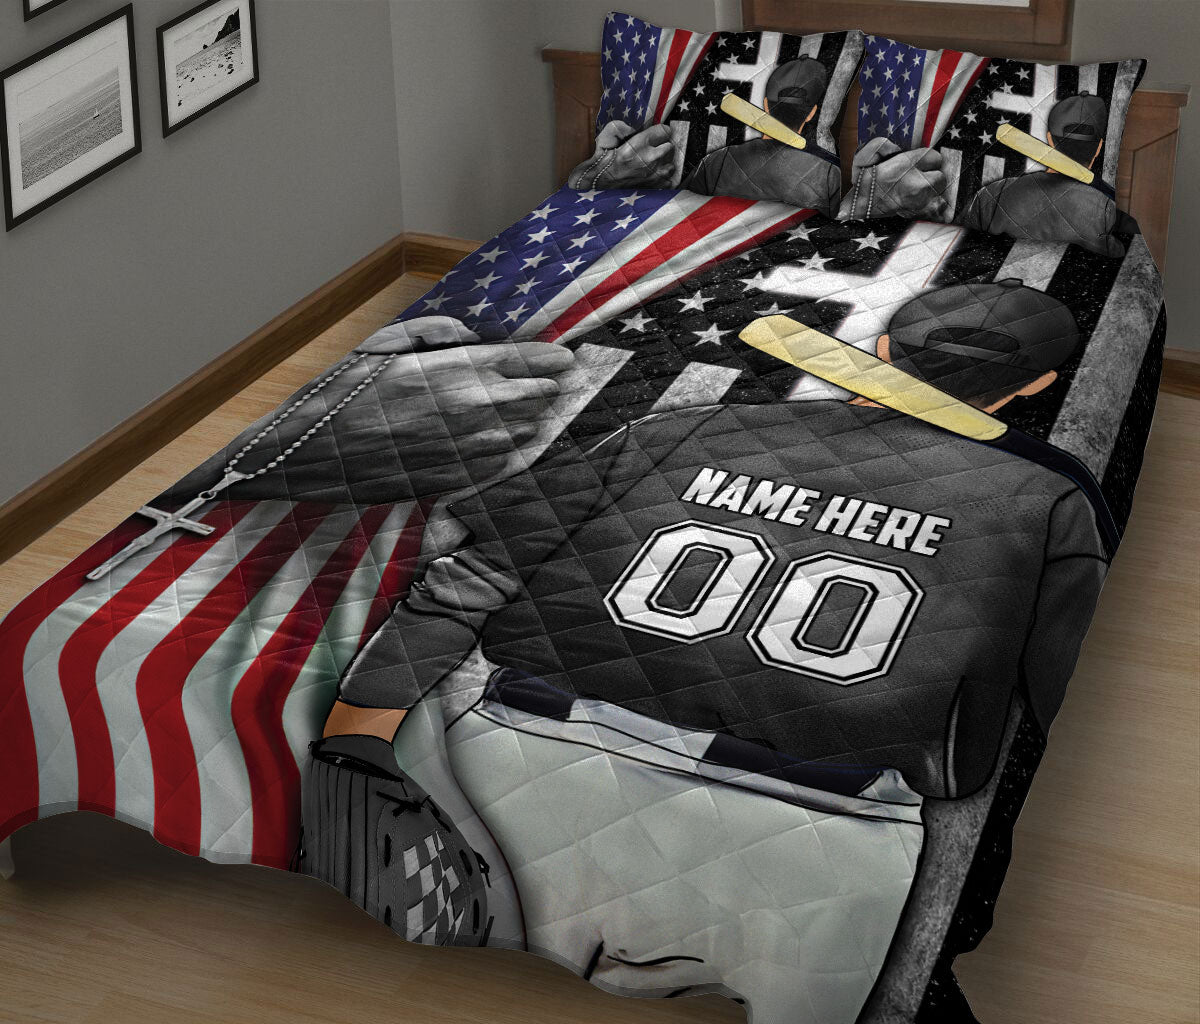 Ohaprints-Quilt-Bed-Set-Pillowcase-Baseball-Player-Christian-American-Flag-Cross-Custom-Personalized-Name-Number-Blanket-Bedspread-Bedding-3019-King (90'' x 100'')